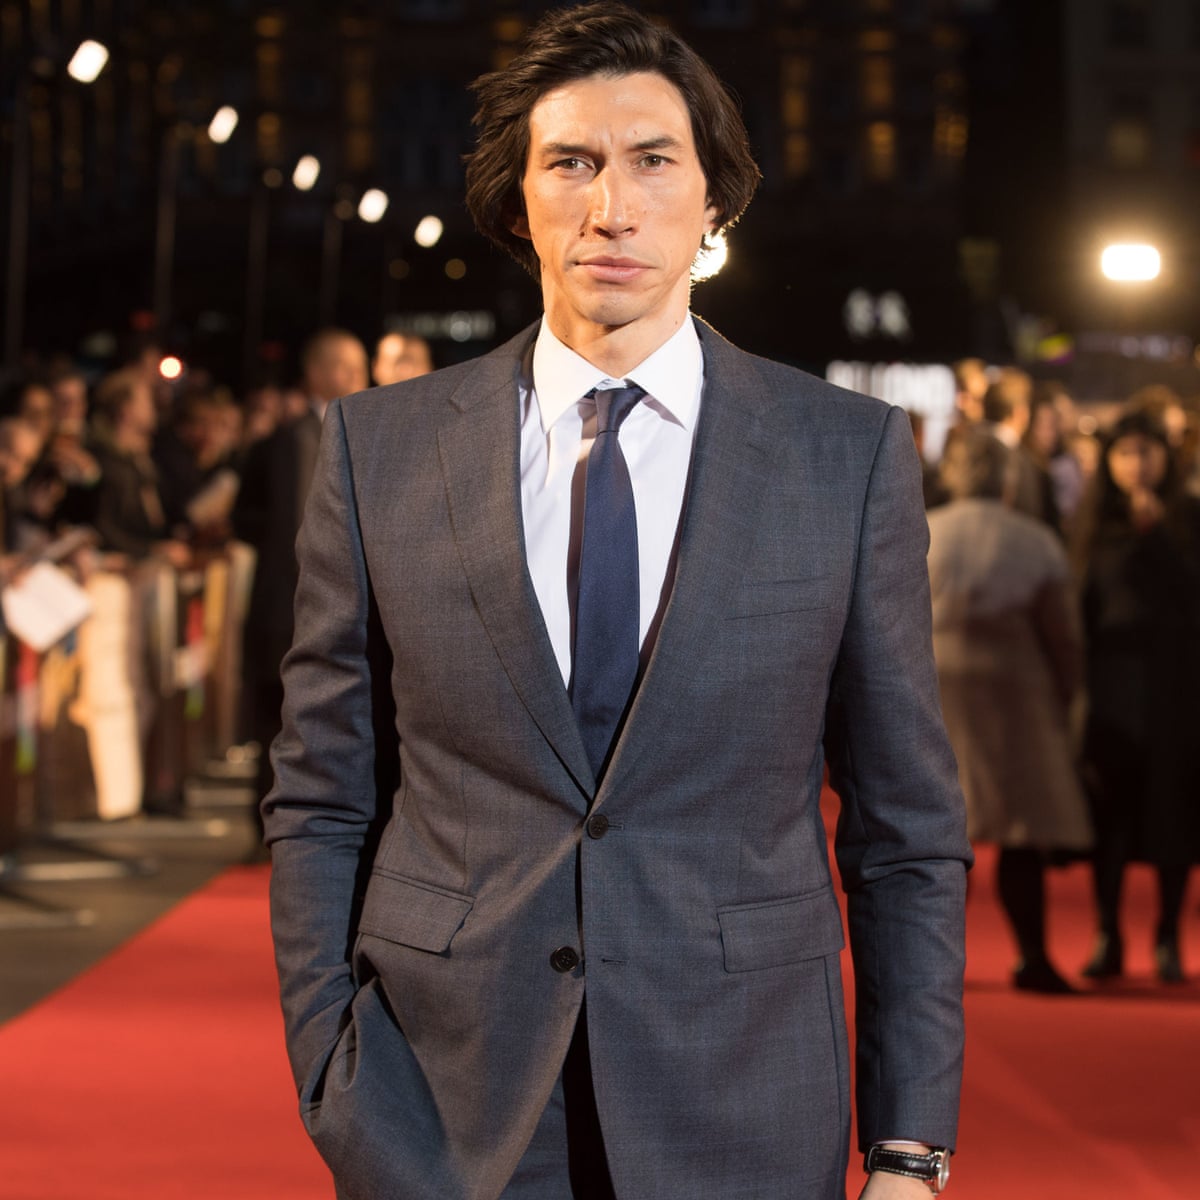 fit For Stardom How Adam Driver Went From Us Marine To Hollywood Heartthrob Adam Driver The Guardian